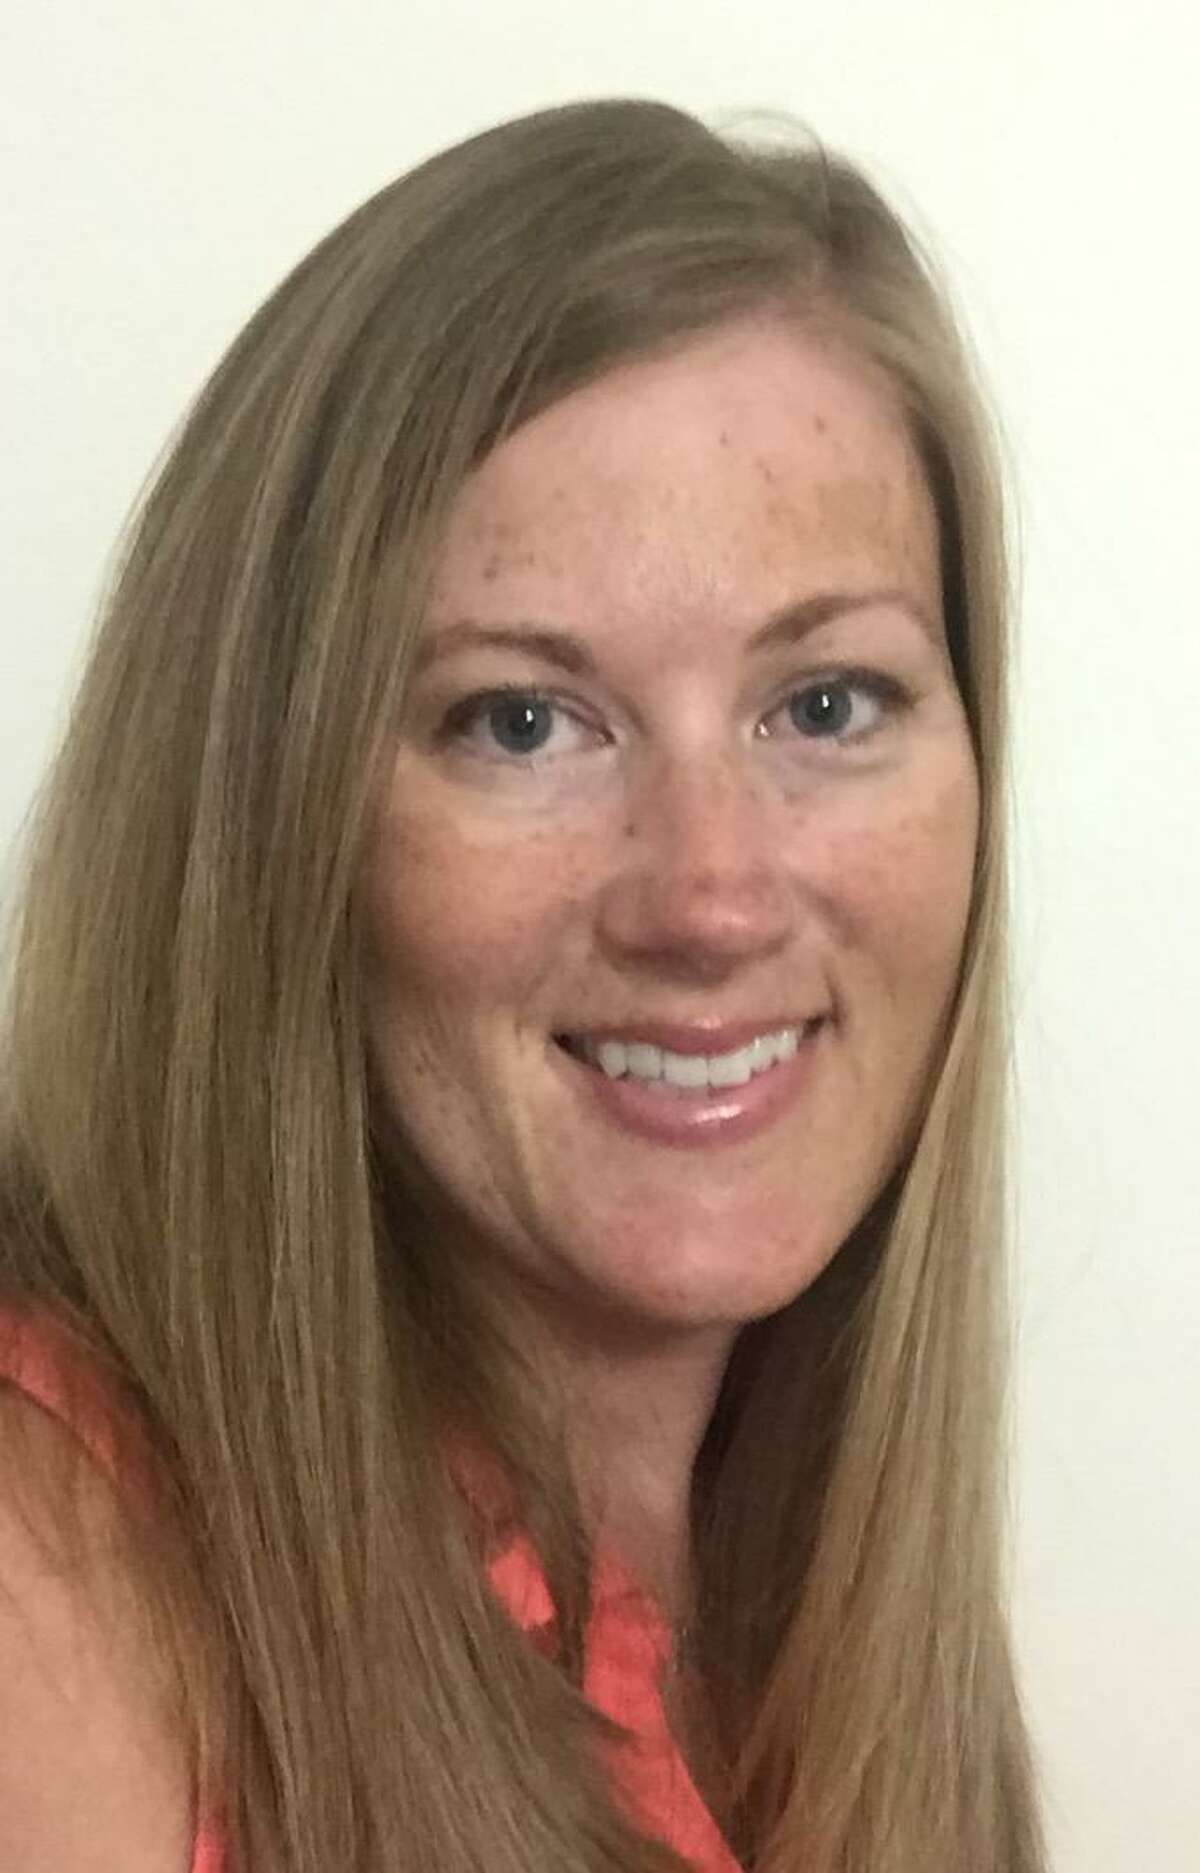 The Women’s Forum of Litchfield welcomes Jennifer Grant, MSW, LCSW who is the Director of Wellness Center Programs at the Connecticut Junior Republic, to speak on the subject of Mental Health in Connecticut.